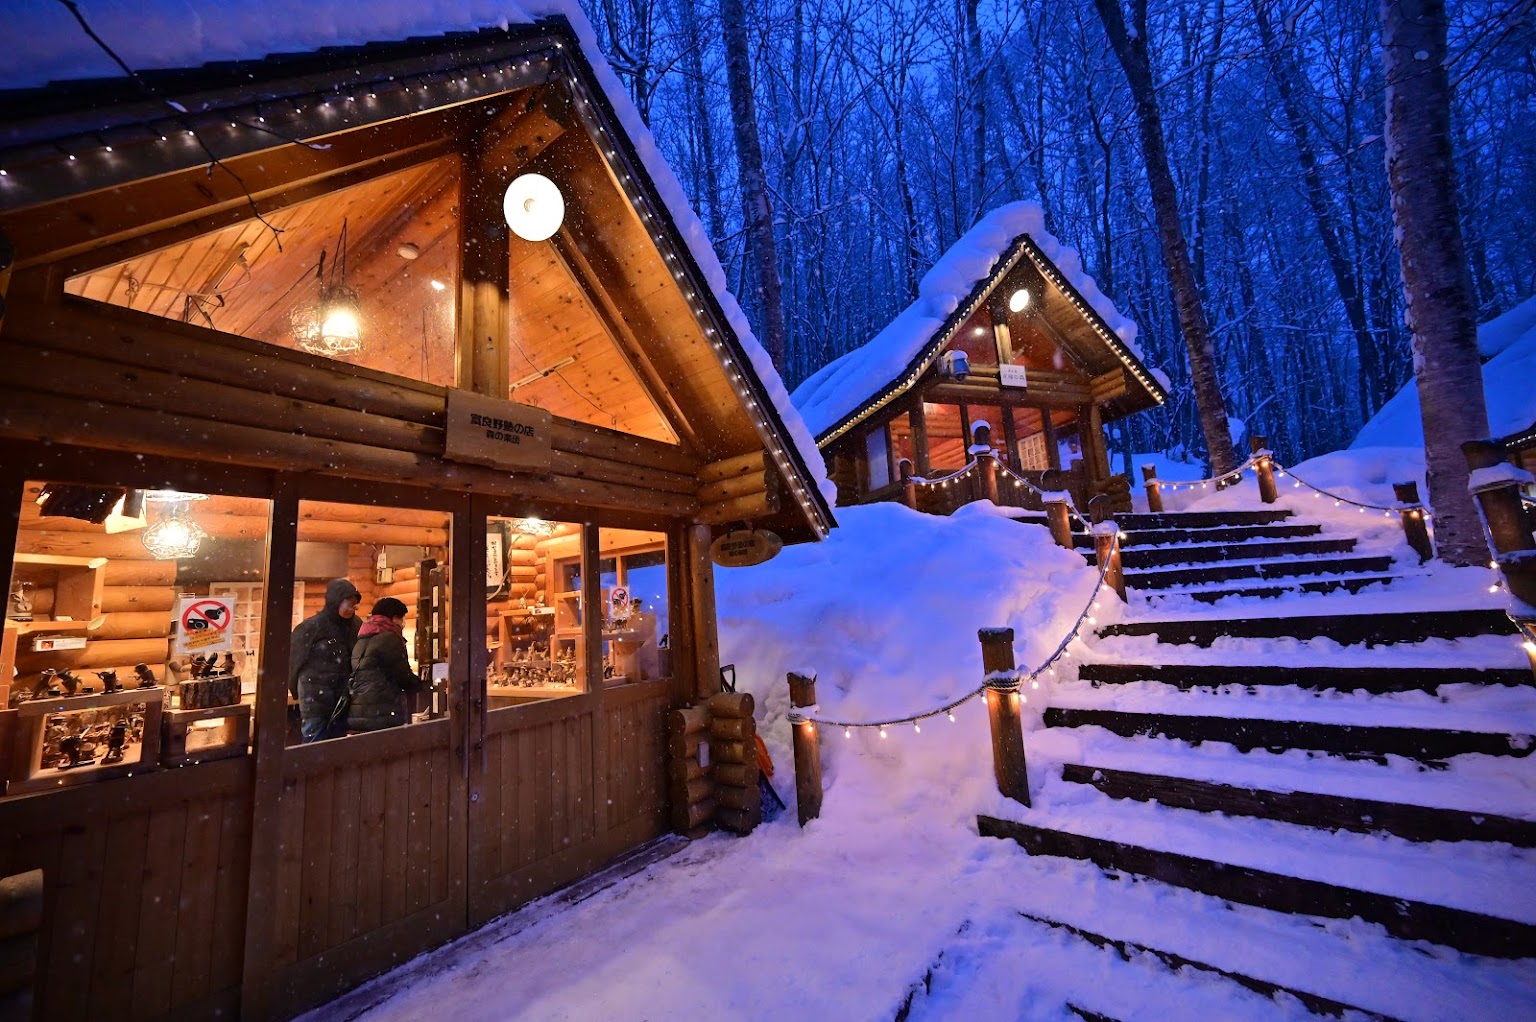 Cities in Japan to see snow - Ningle Terrace in Furano